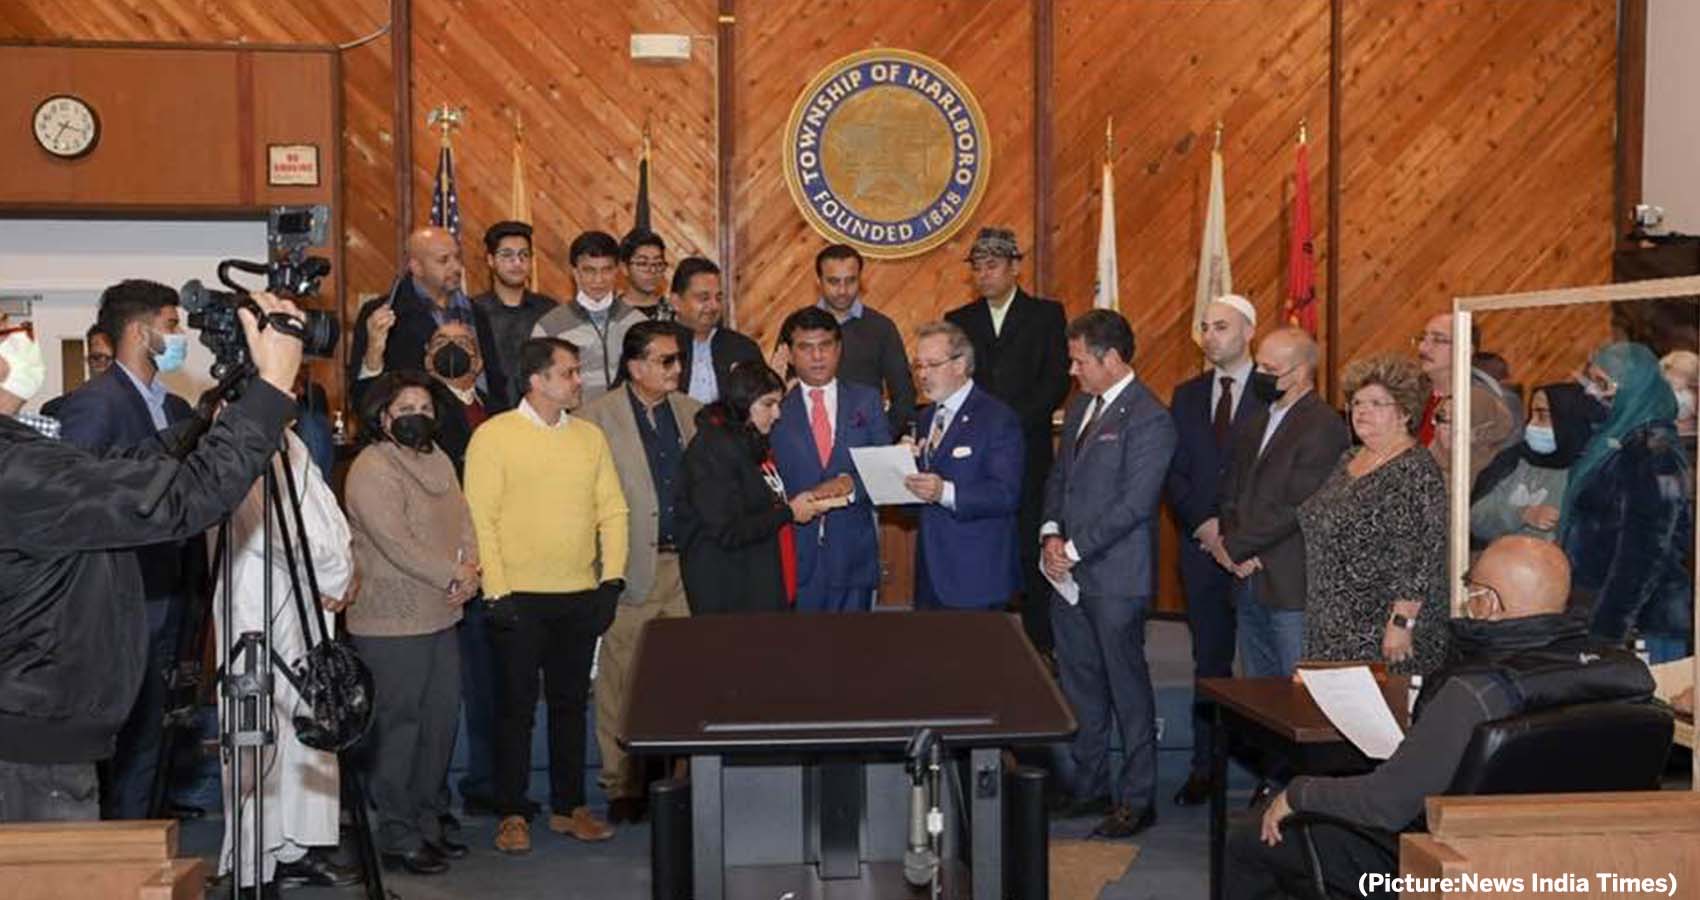 Indian-American Republican Elected President Of NJ Town City Council